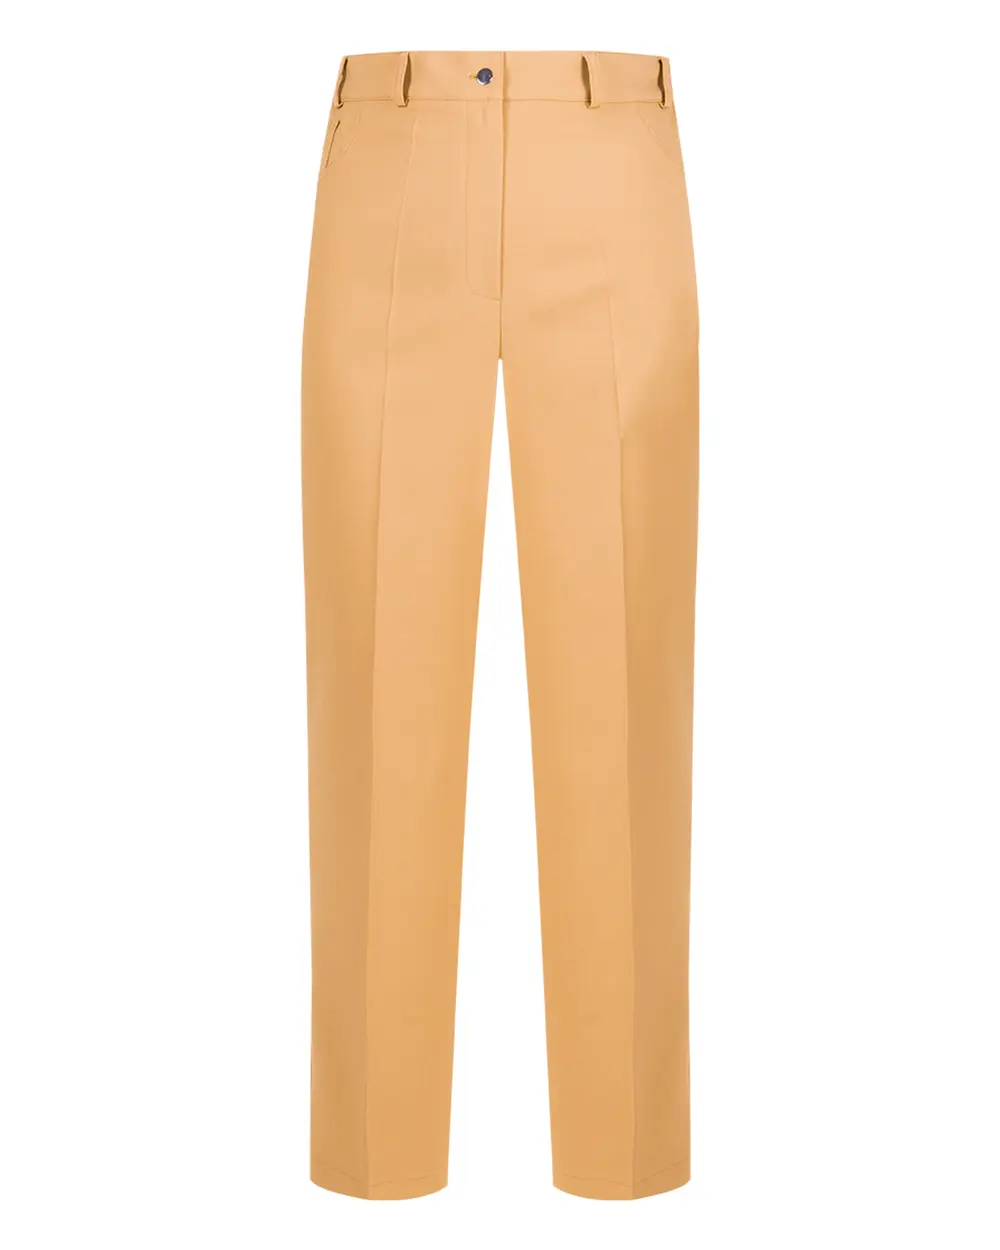  Plus Size Classic Trousers